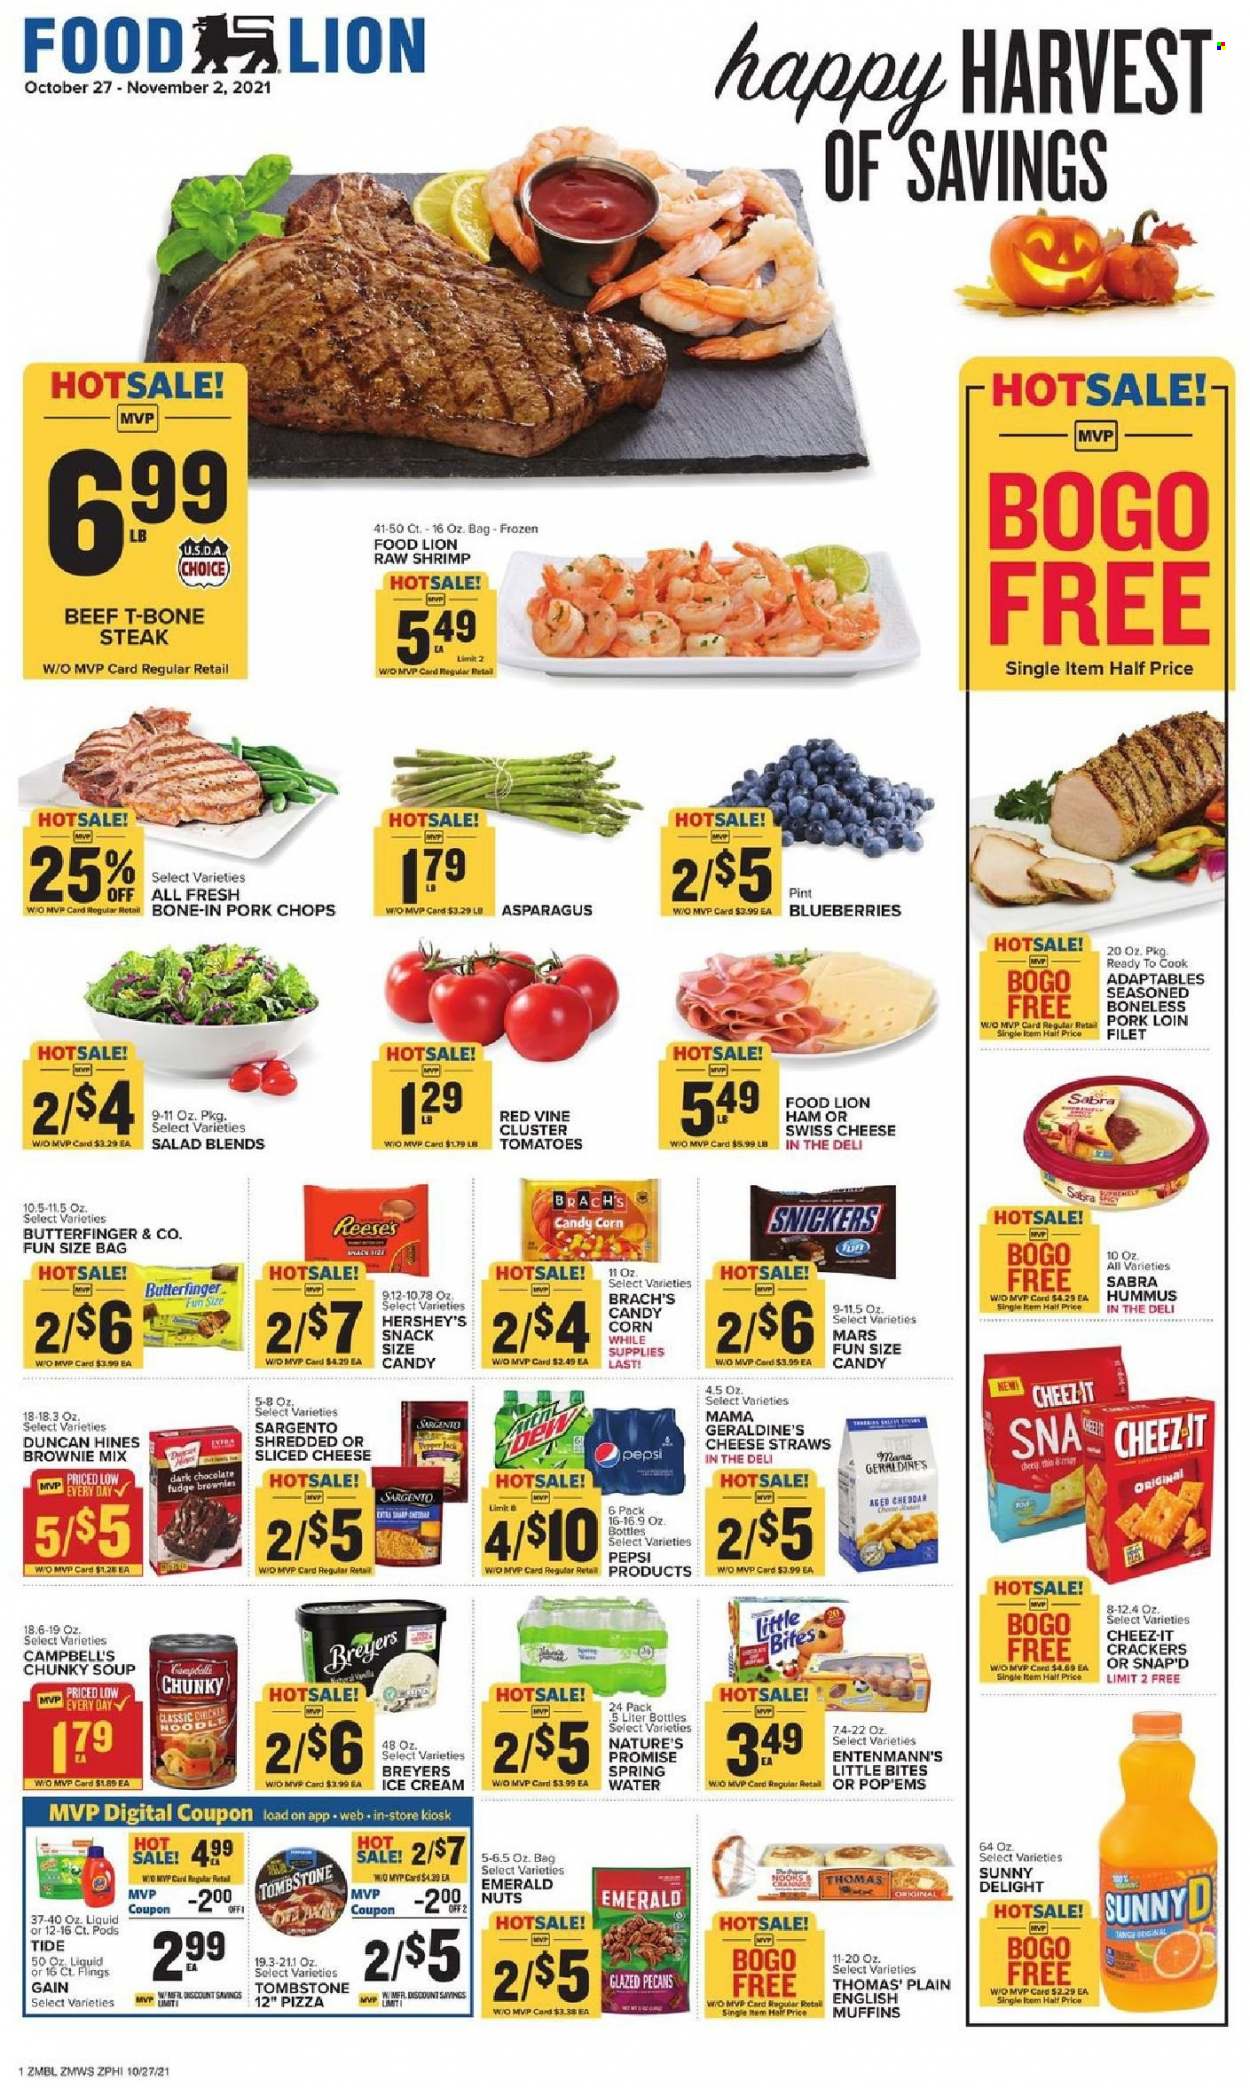 thumbnail - Food Lion Flyer - 10/27/2021 - 11/02/2021 - Sales products - english muffins, Nature’s Promise, Entenmann's, brownie mix, asparagus, corn, salad, blueberries, shrimps, Campbell's, pizza, soup, noodles, ham, hummus, sliced cheese, swiss cheese, Sargento, ice cream, Reese's, Hershey's, fudge, snack, Snickers, Mars, crackers, dark chocolate, Little Bites, Cheez-It, pecans, Pepsi, spring water, beef meat, t-bone steak, steak, pork chops, pork loin, pork meat, Gain, Tide, straw. Page 1.